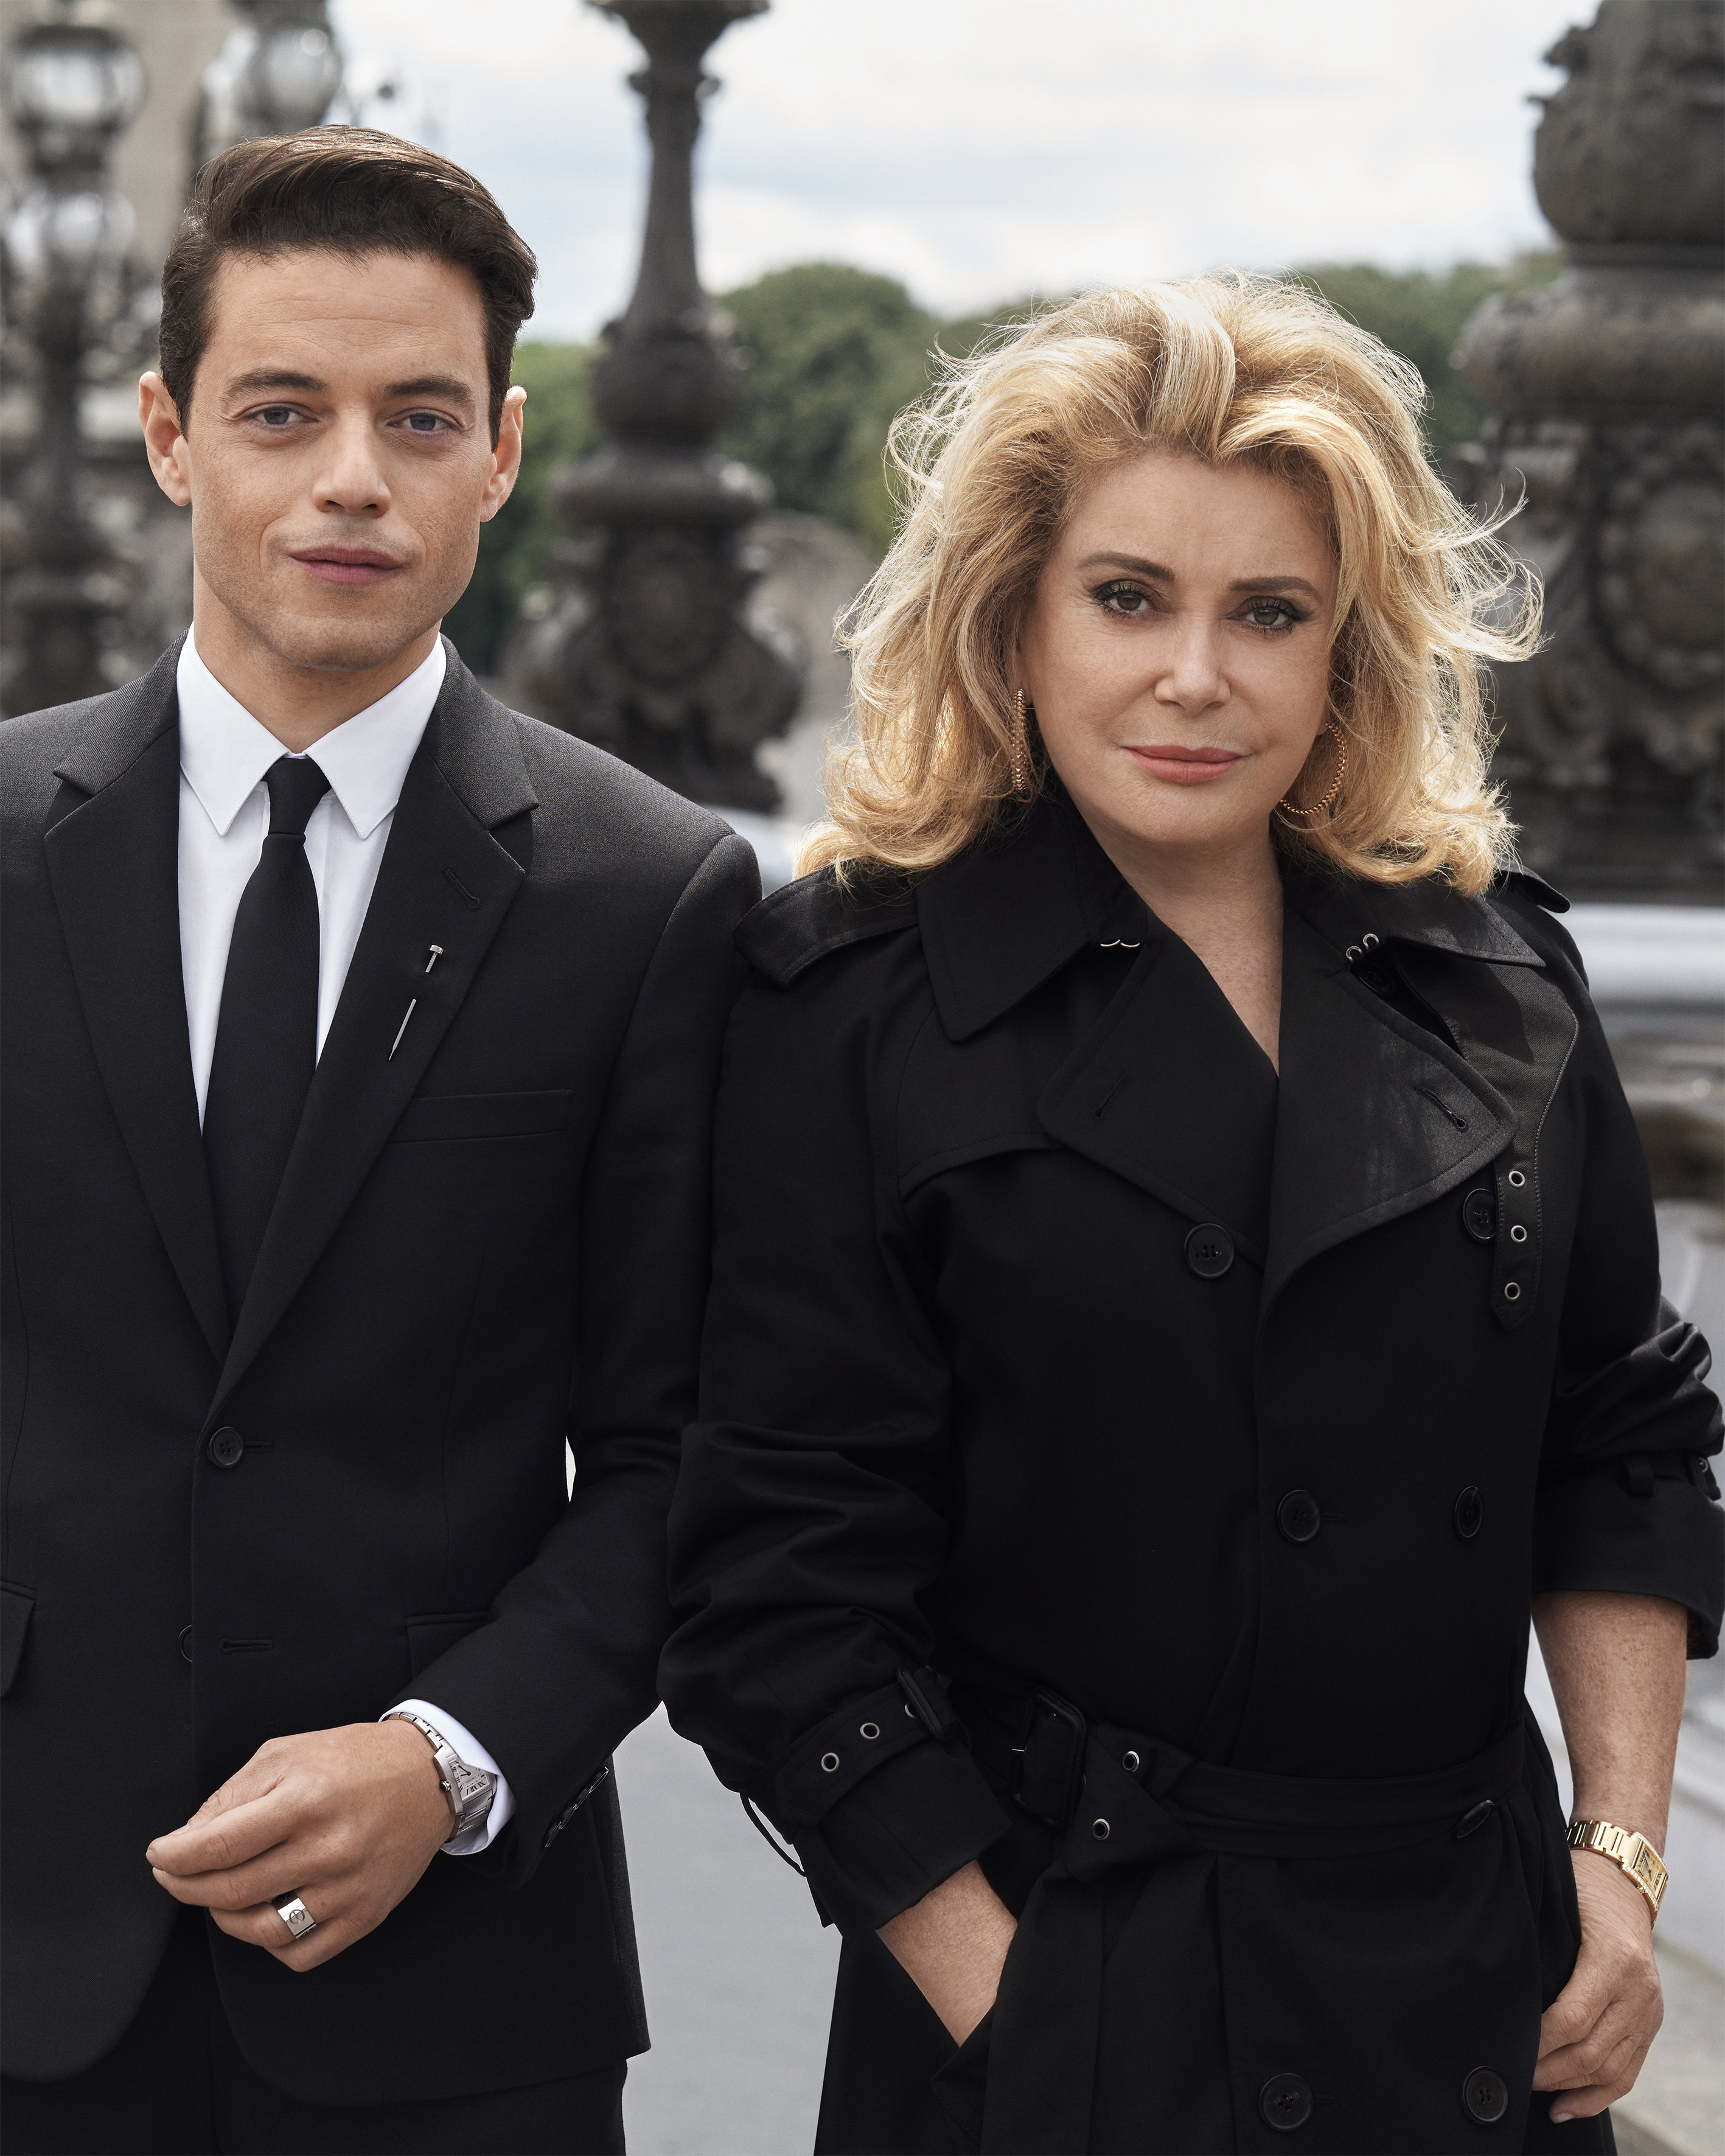 Rami Malek and Catherine Deneuve in a Cartier video promoting the brand’s Tank Francaise watch, directed by Guy Ritchie and shot in Paris.